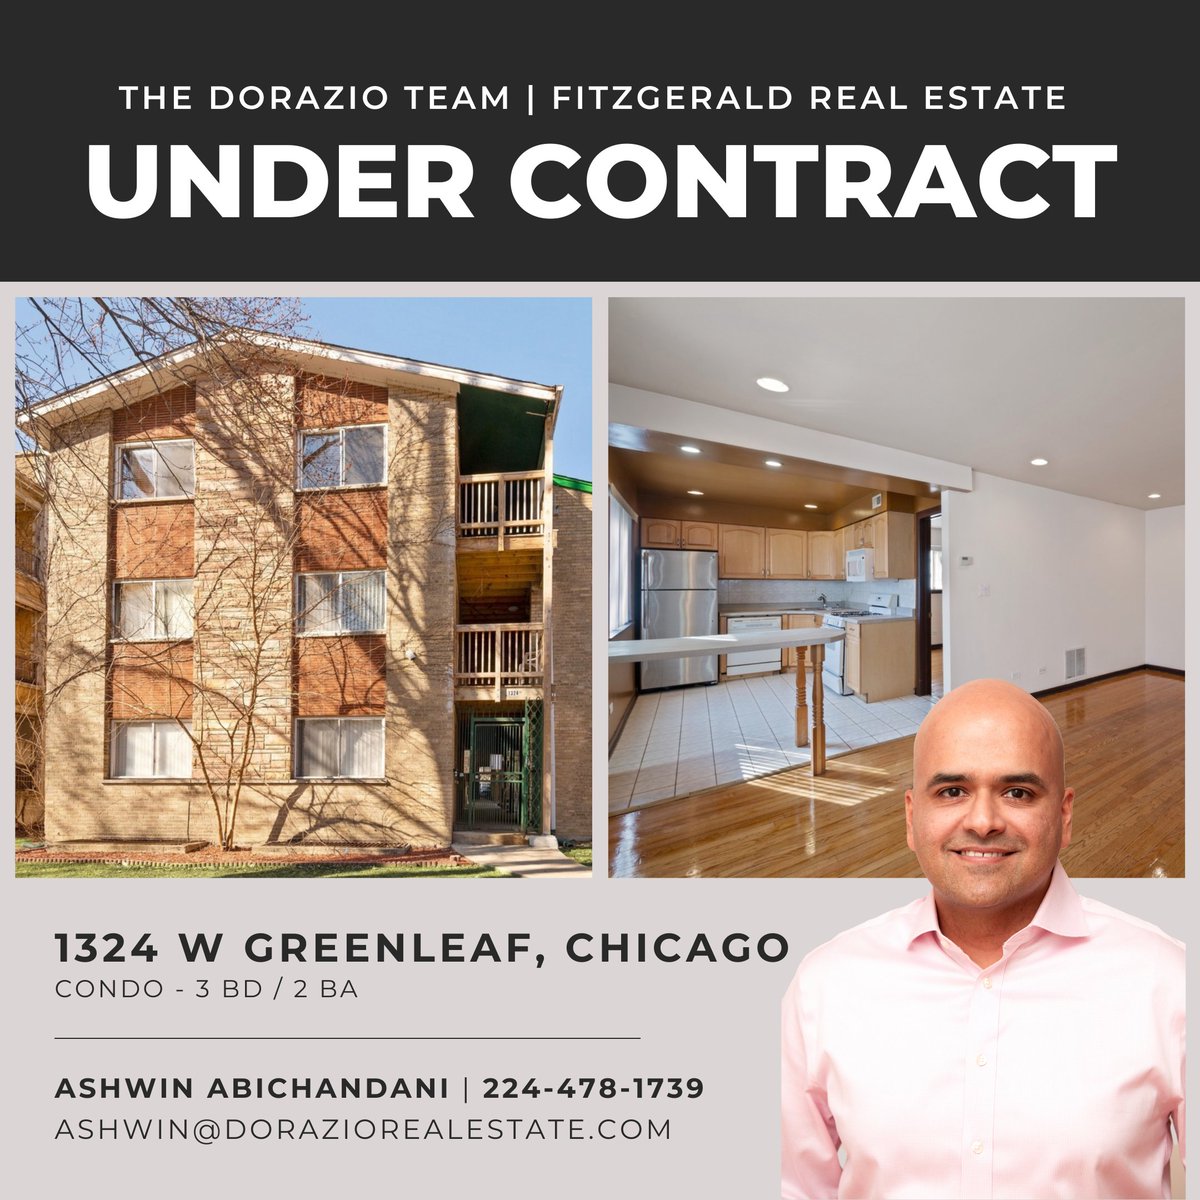 🏡🎉 Shout out to Ashwin for his dedication and expertise helping his #veteran client secure this 3bd/2ba condo in #rogerspark using the #VALoan 🌟🇺🇸!
#doraziorealestate #UnderContract #salepending #valoanspecialist #rogersparkchicago #rogersparkrealestate #chicagorealestate